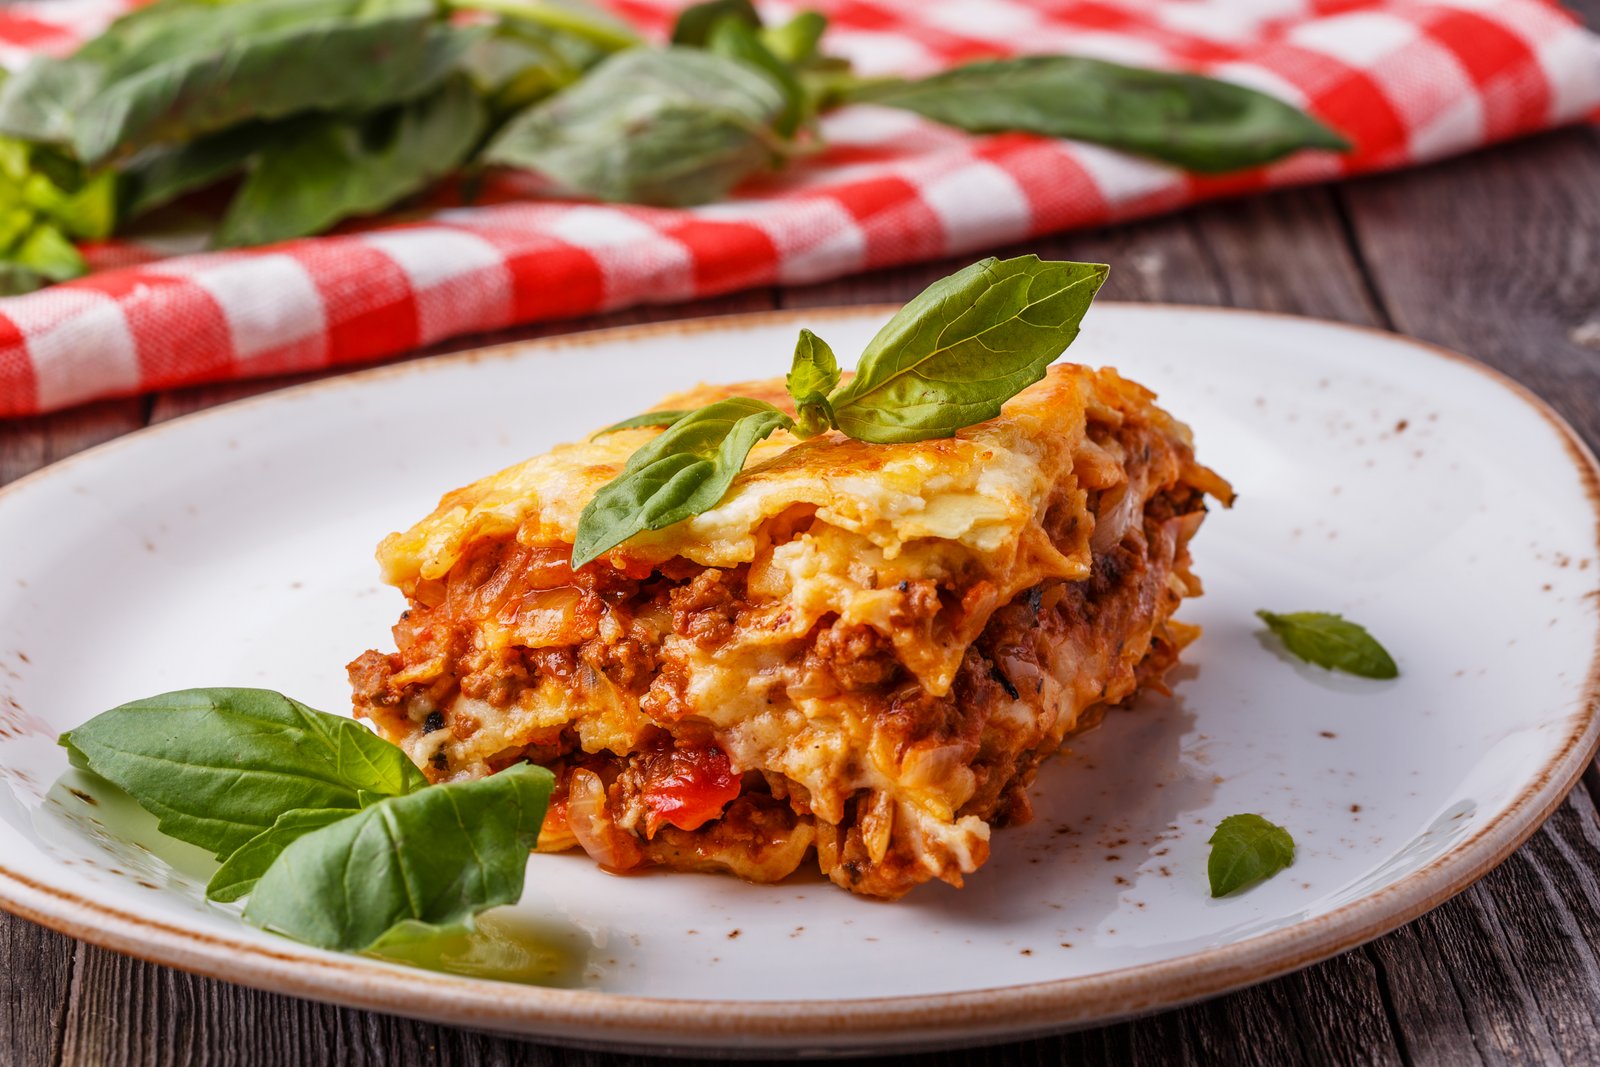 Garfield's Lasagna Recipe With Minced Meat And Italian Spices